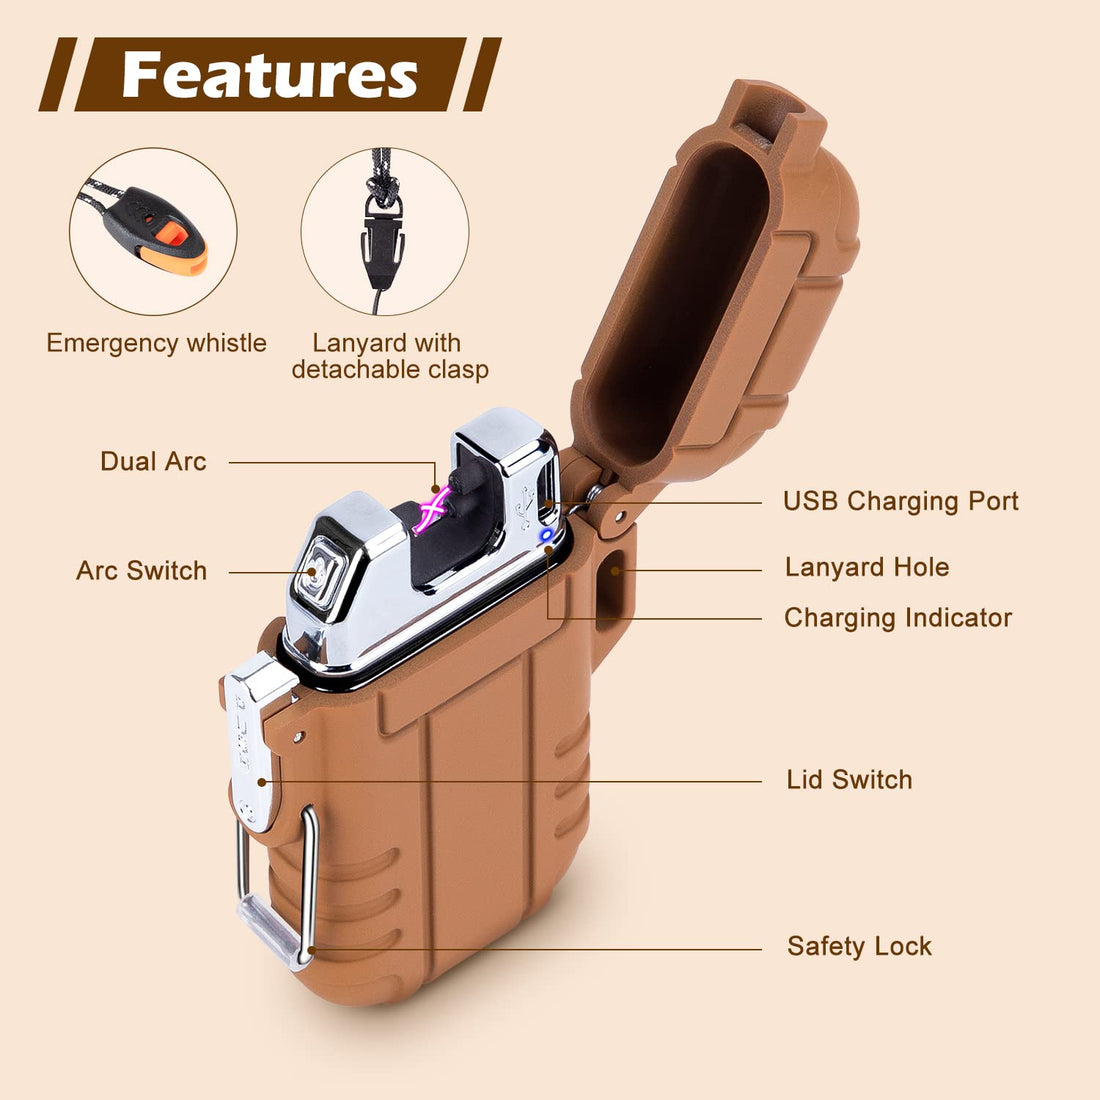 LcFun Electric Lighter USB Rechargeable Lighter Dual Arc Plasma lighters Waterproof-Windproof-Flameless-Cool Lighters with Whistle for Camping,Hiking,Adventure,Survival Tactical Gear (Brown)